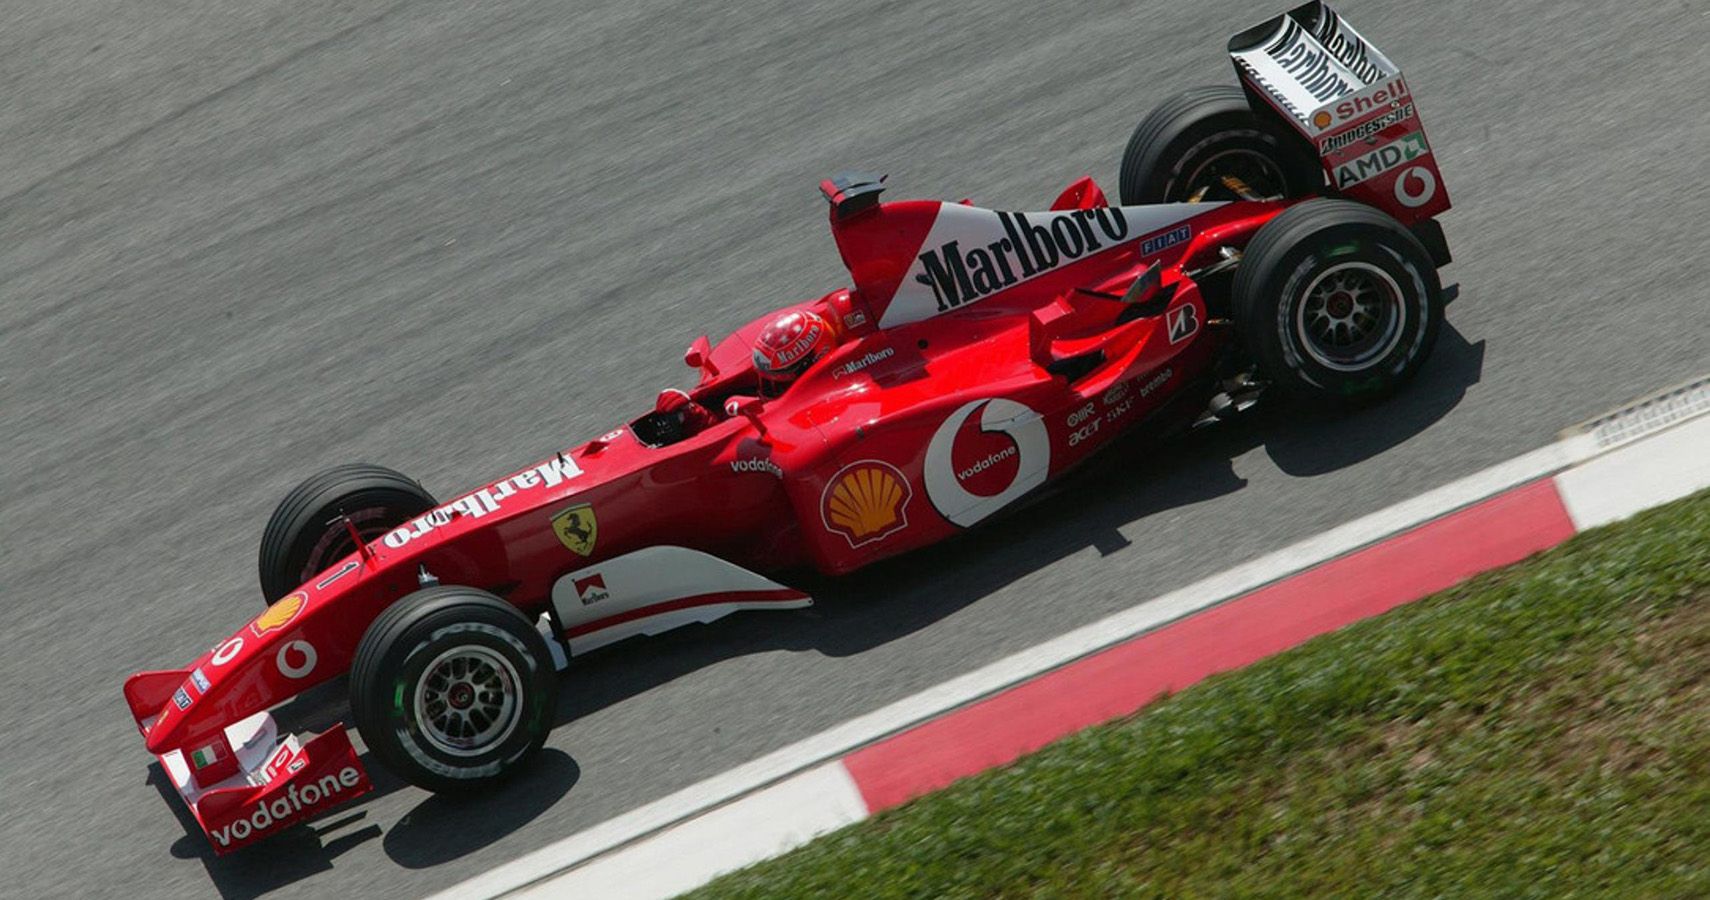 In 2002, Out Of A Total Of 15 Races, The F2002 Took 14 Wins, Getting Beaten Only By David Coulthard In Monaco